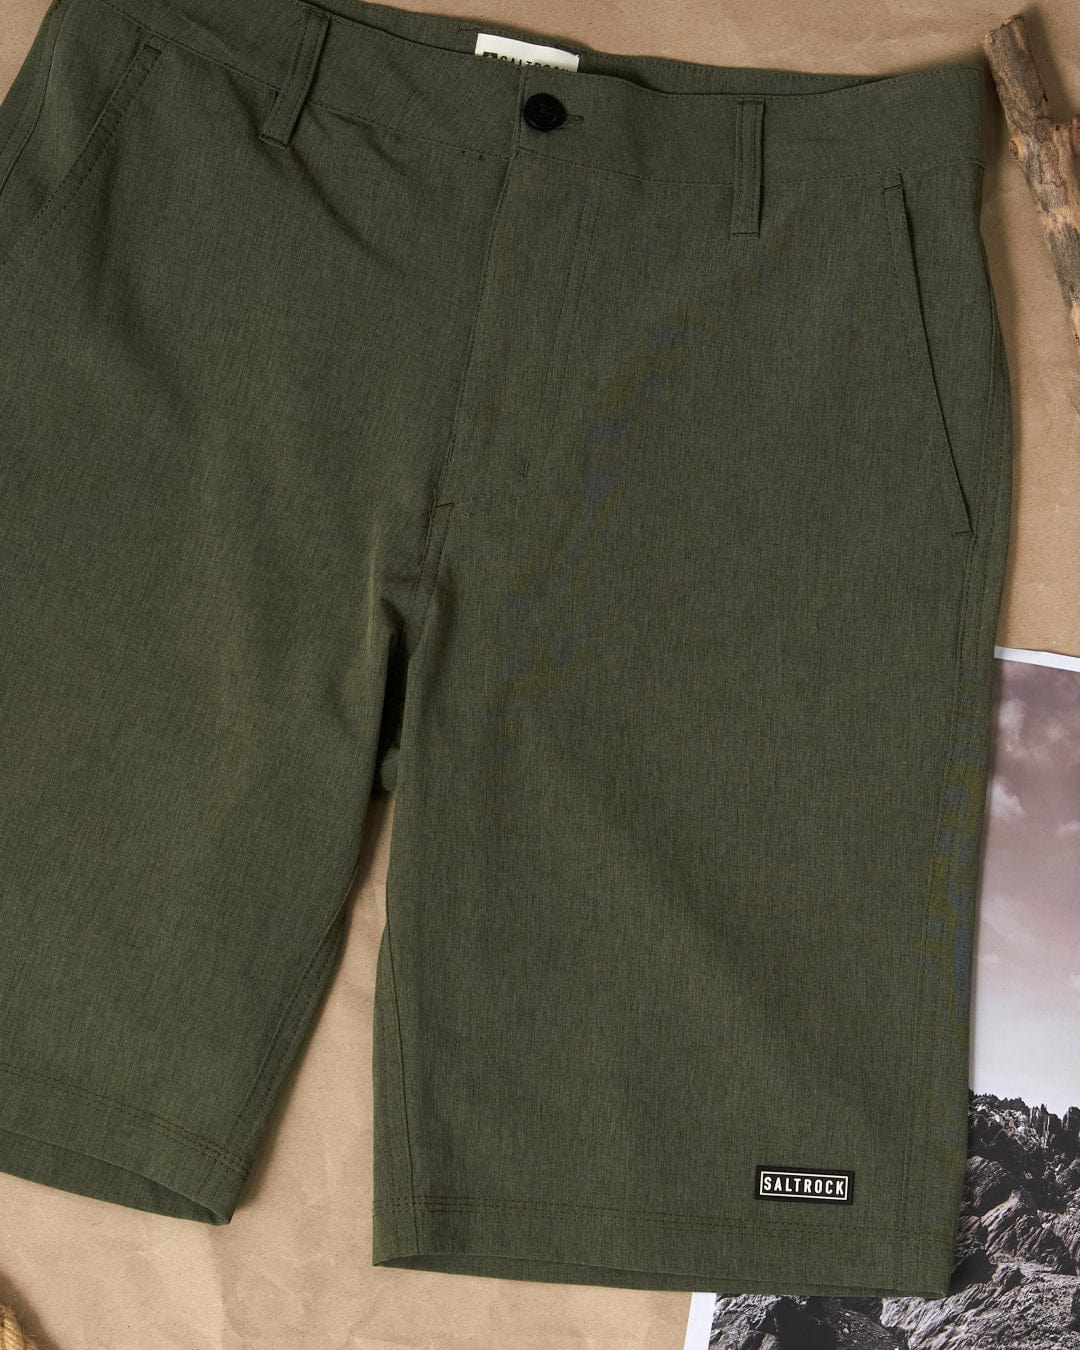 The Saltrock Amphibian 2 - Mens Hybrid Boardshorts - Dark Green are made of 4-way stretch polyester.